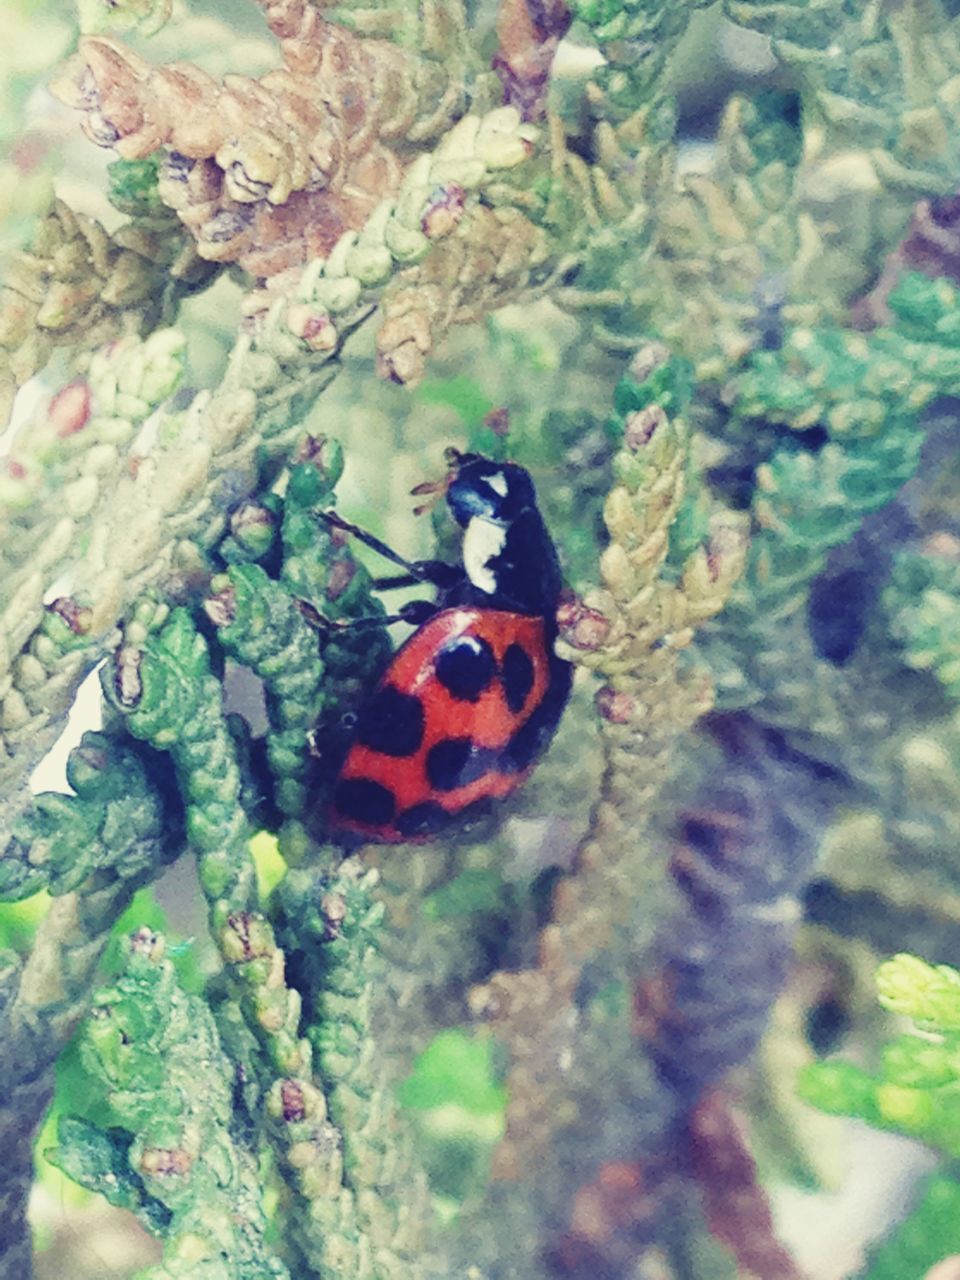 animal themes, one animal, animals in the wild, wildlife, insect, close-up, animal markings, nature, focus on foreground, red, beauty in nature, selective focus, ladybug, spotted, zoology, perching, natural pattern, outdoors, butterfly - insect, day